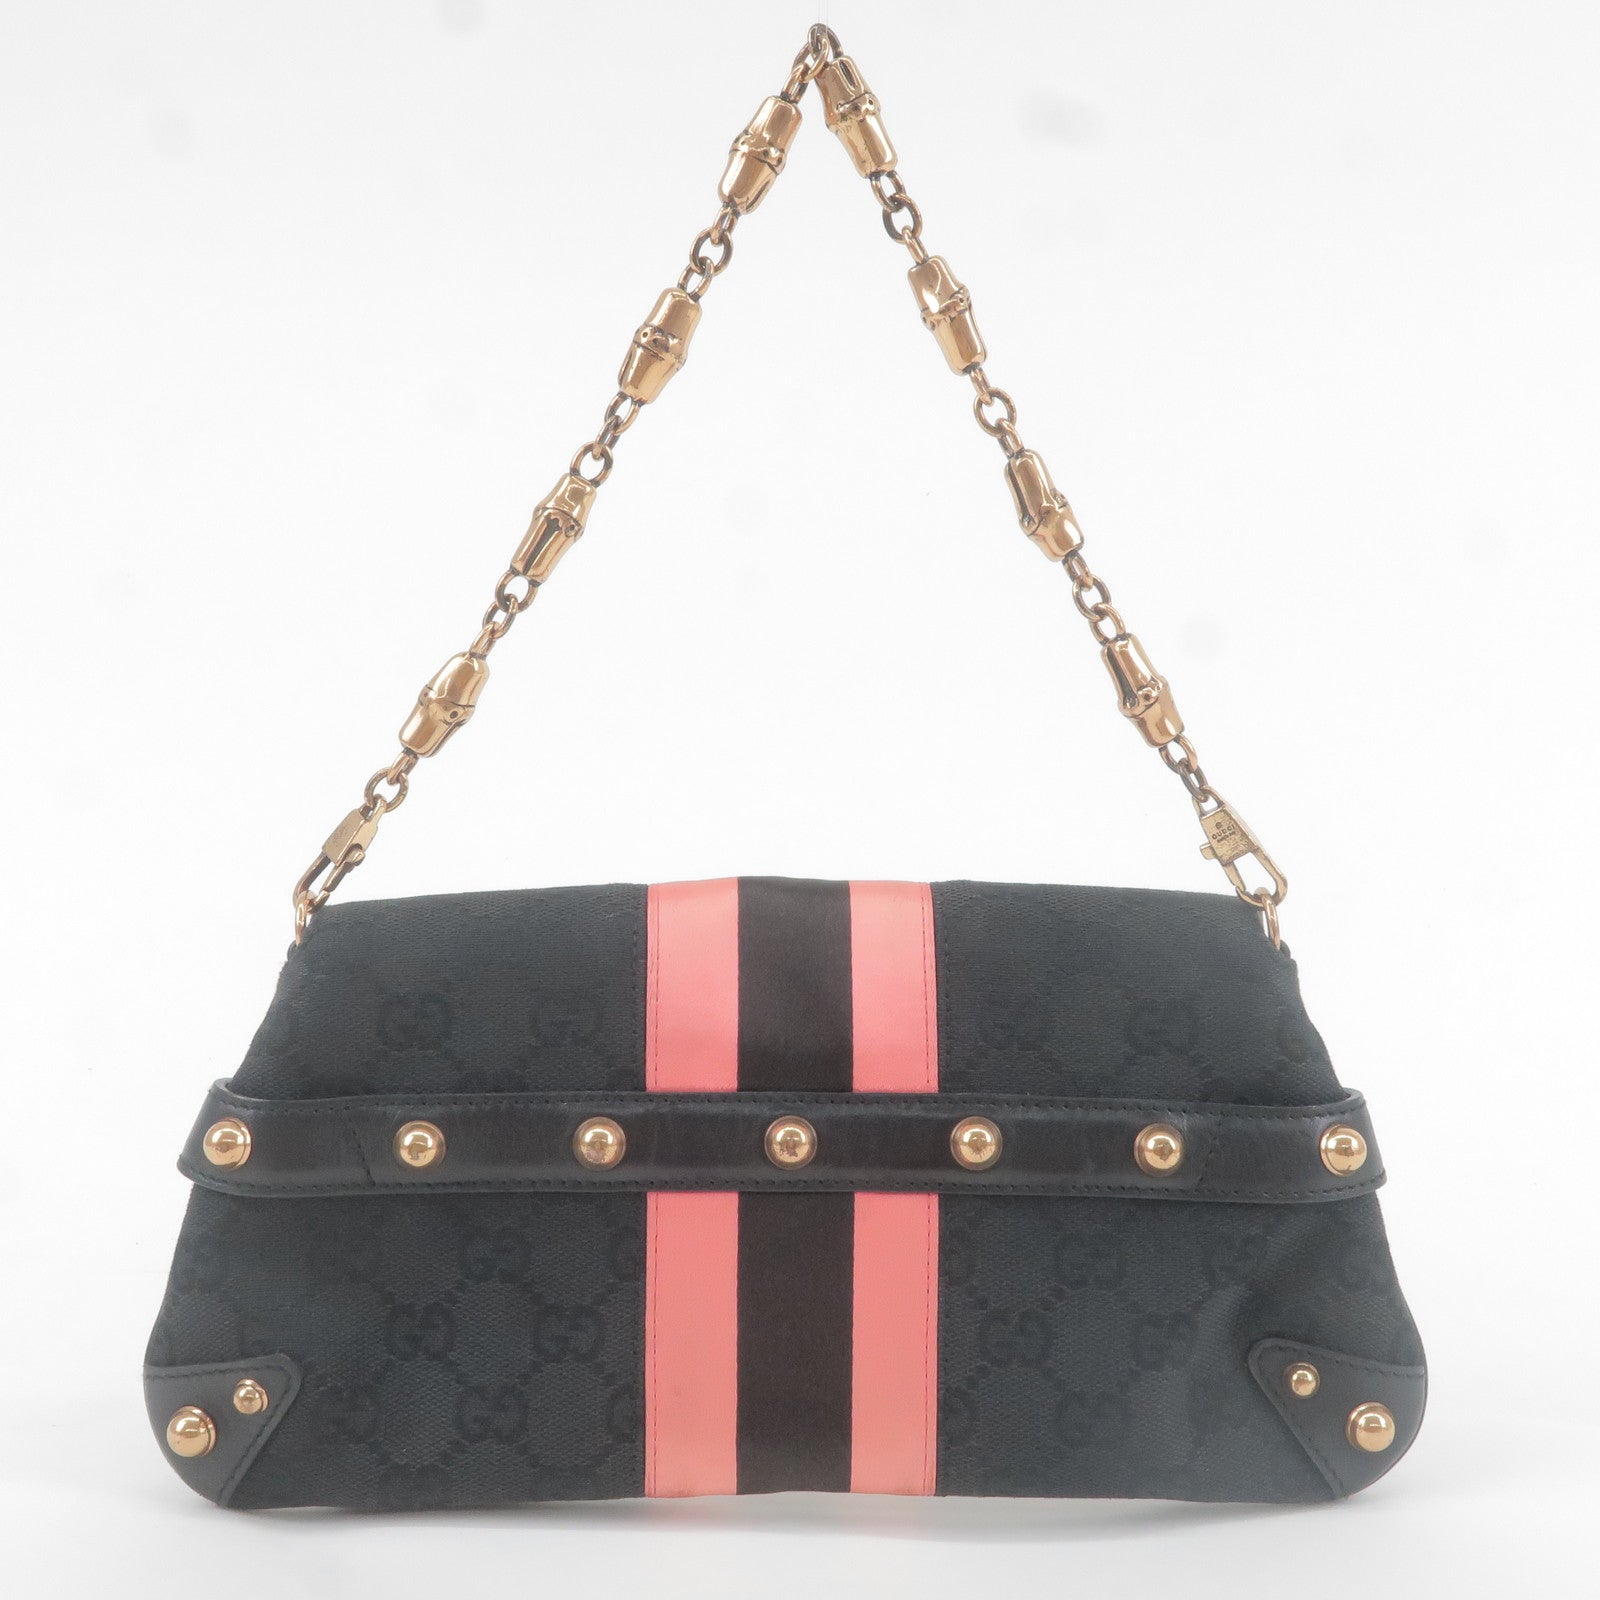 Gucci Pre-owned Classic GG Canvas Panelled Handbag - Black